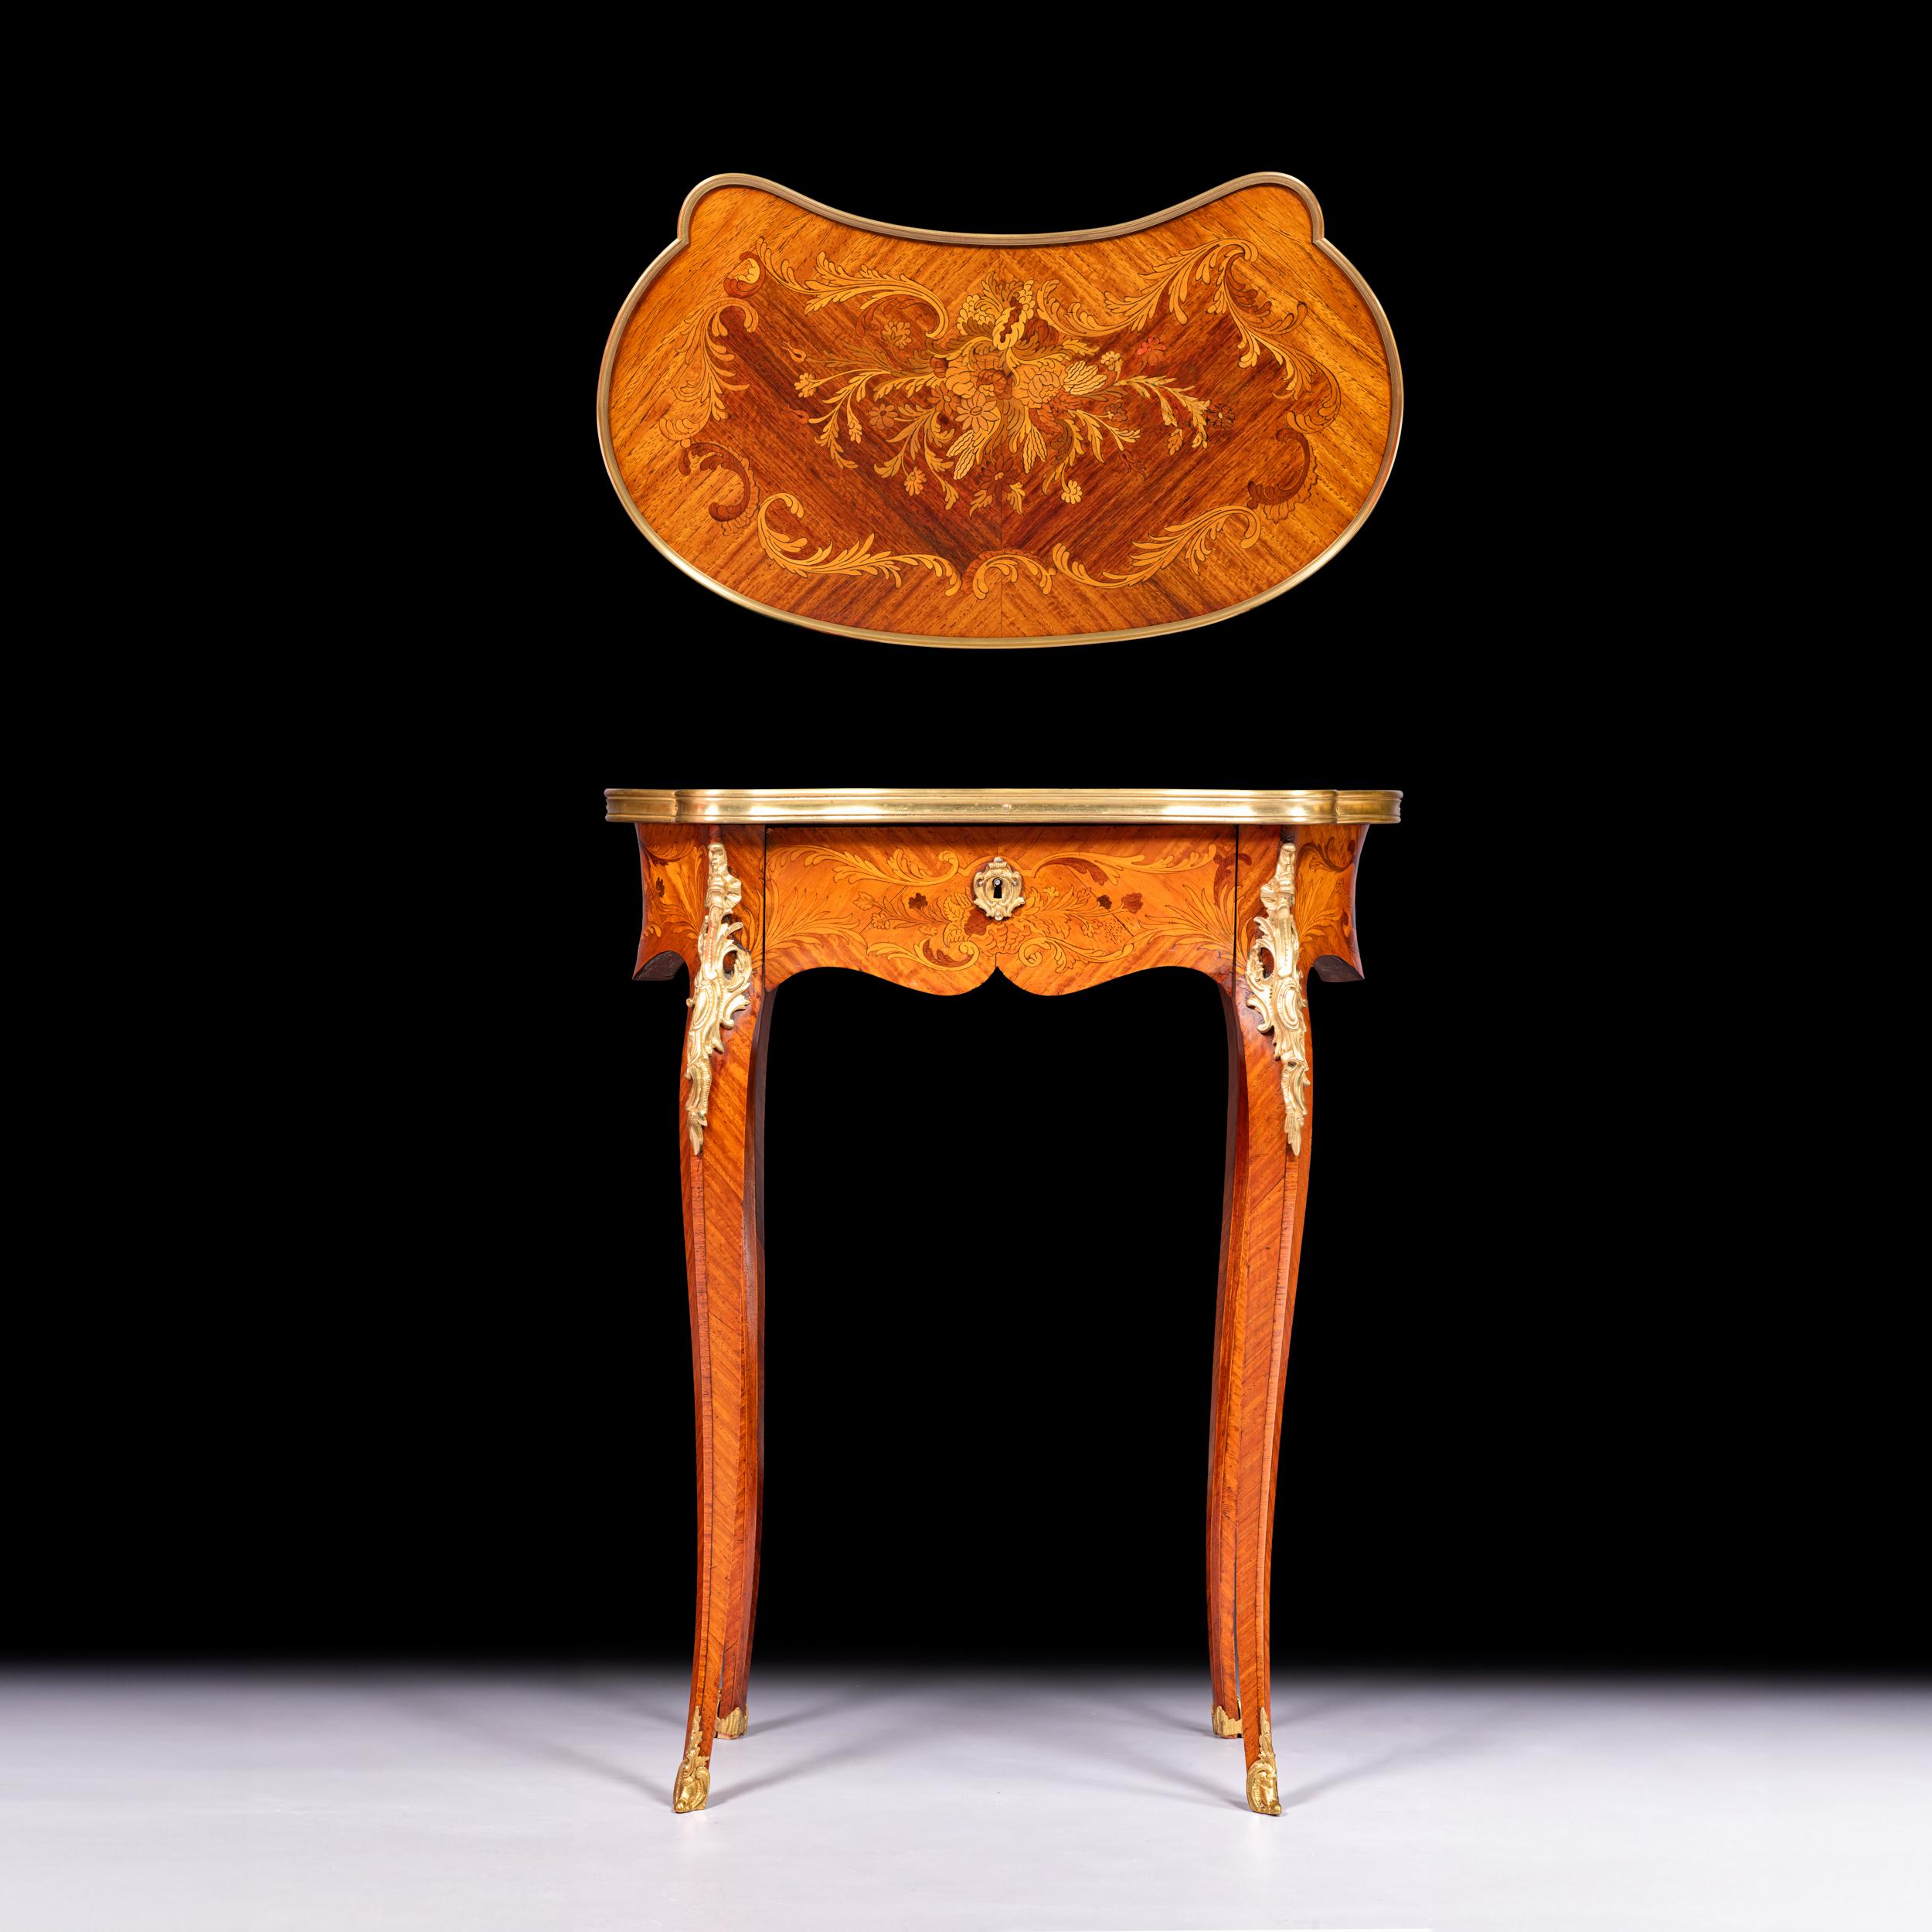 A very fine and elegant kidney shaped side / occasional table, raised by four delicately scrolled cabriole legs the kidney-shaped table is fitted with a small central lockable drawer. The table top is decorated with a pattern marquetry, while the